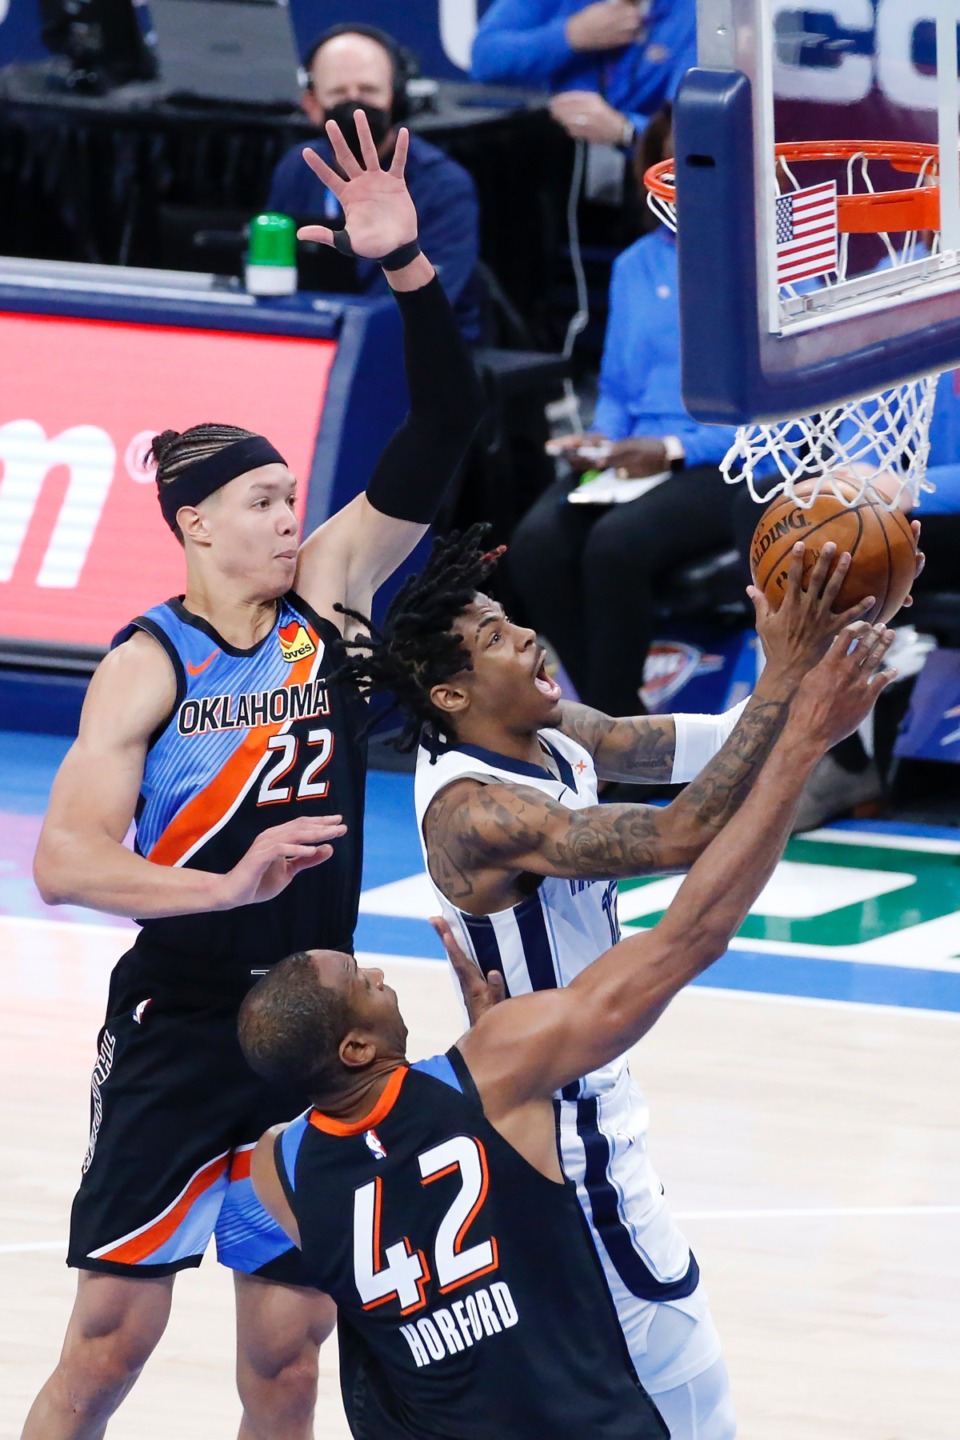 <strong>Grizzlies guard Ja Morant (12) drives past Oklahoma City Thunder center Isaiah Roby (22) and center Al Horford (42)</strong>&nbsp;<strong>on March 24 in Oklahoma City.</strong> (Garett Fisbeck/AP)